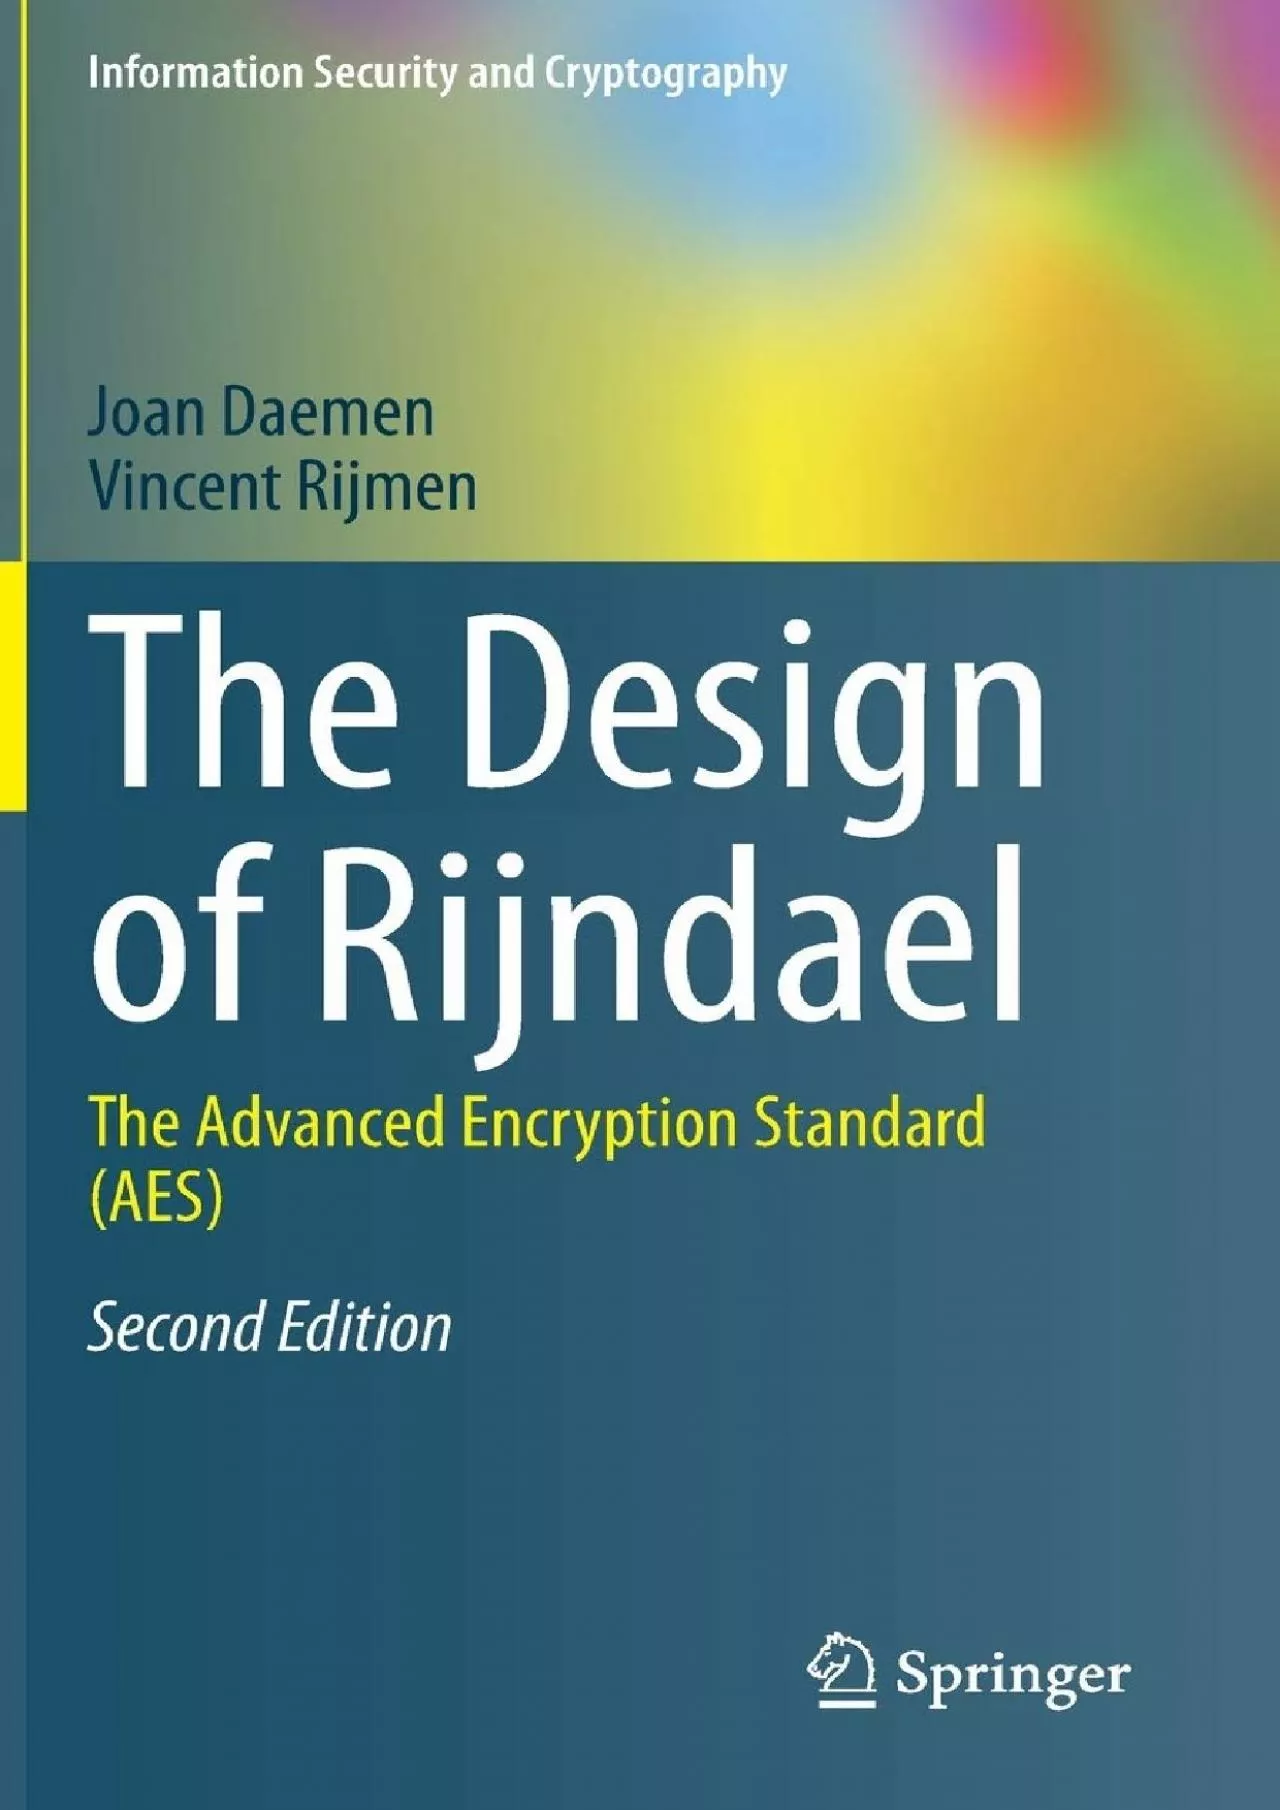 (BOOK)-The Design of Rijndael: The Advanced Encryption Standard (AES) (Information Security